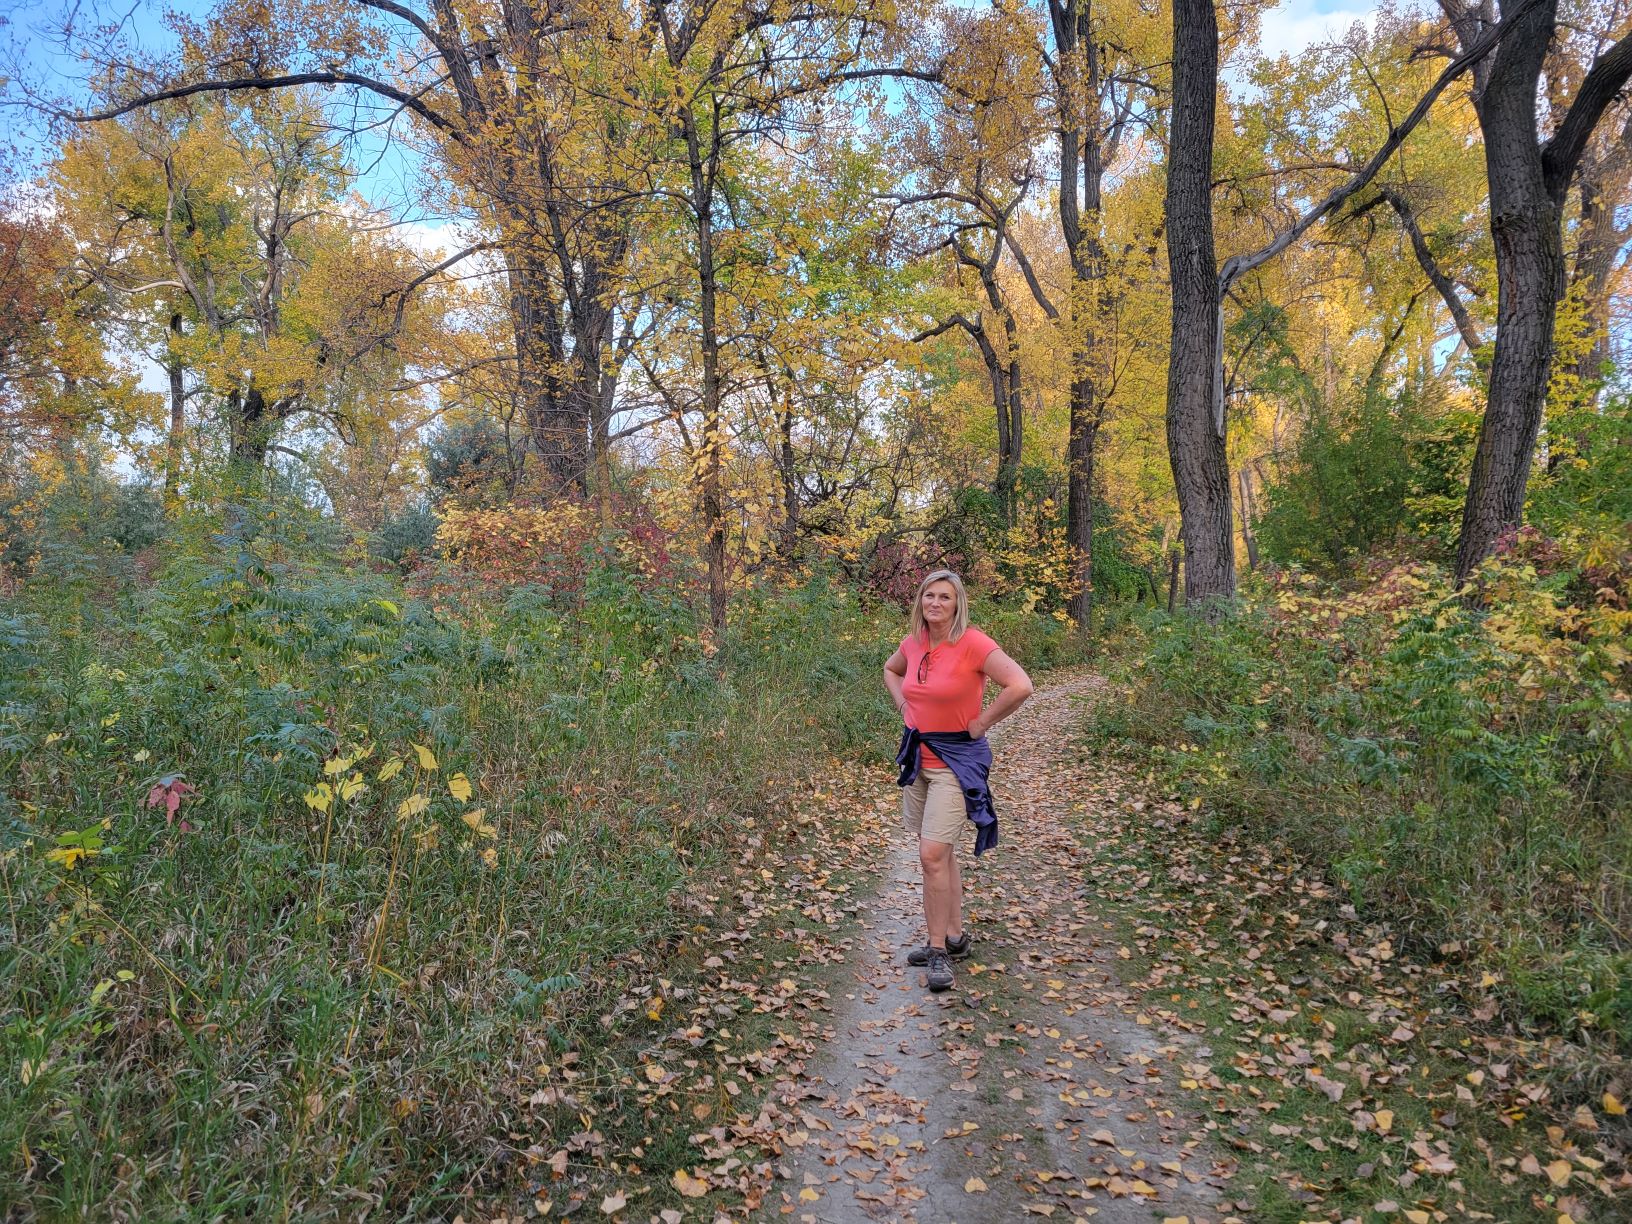 Christi Stonecipher, wearing shorts, standing on a paved trail on a fall day with grass and trees all around.